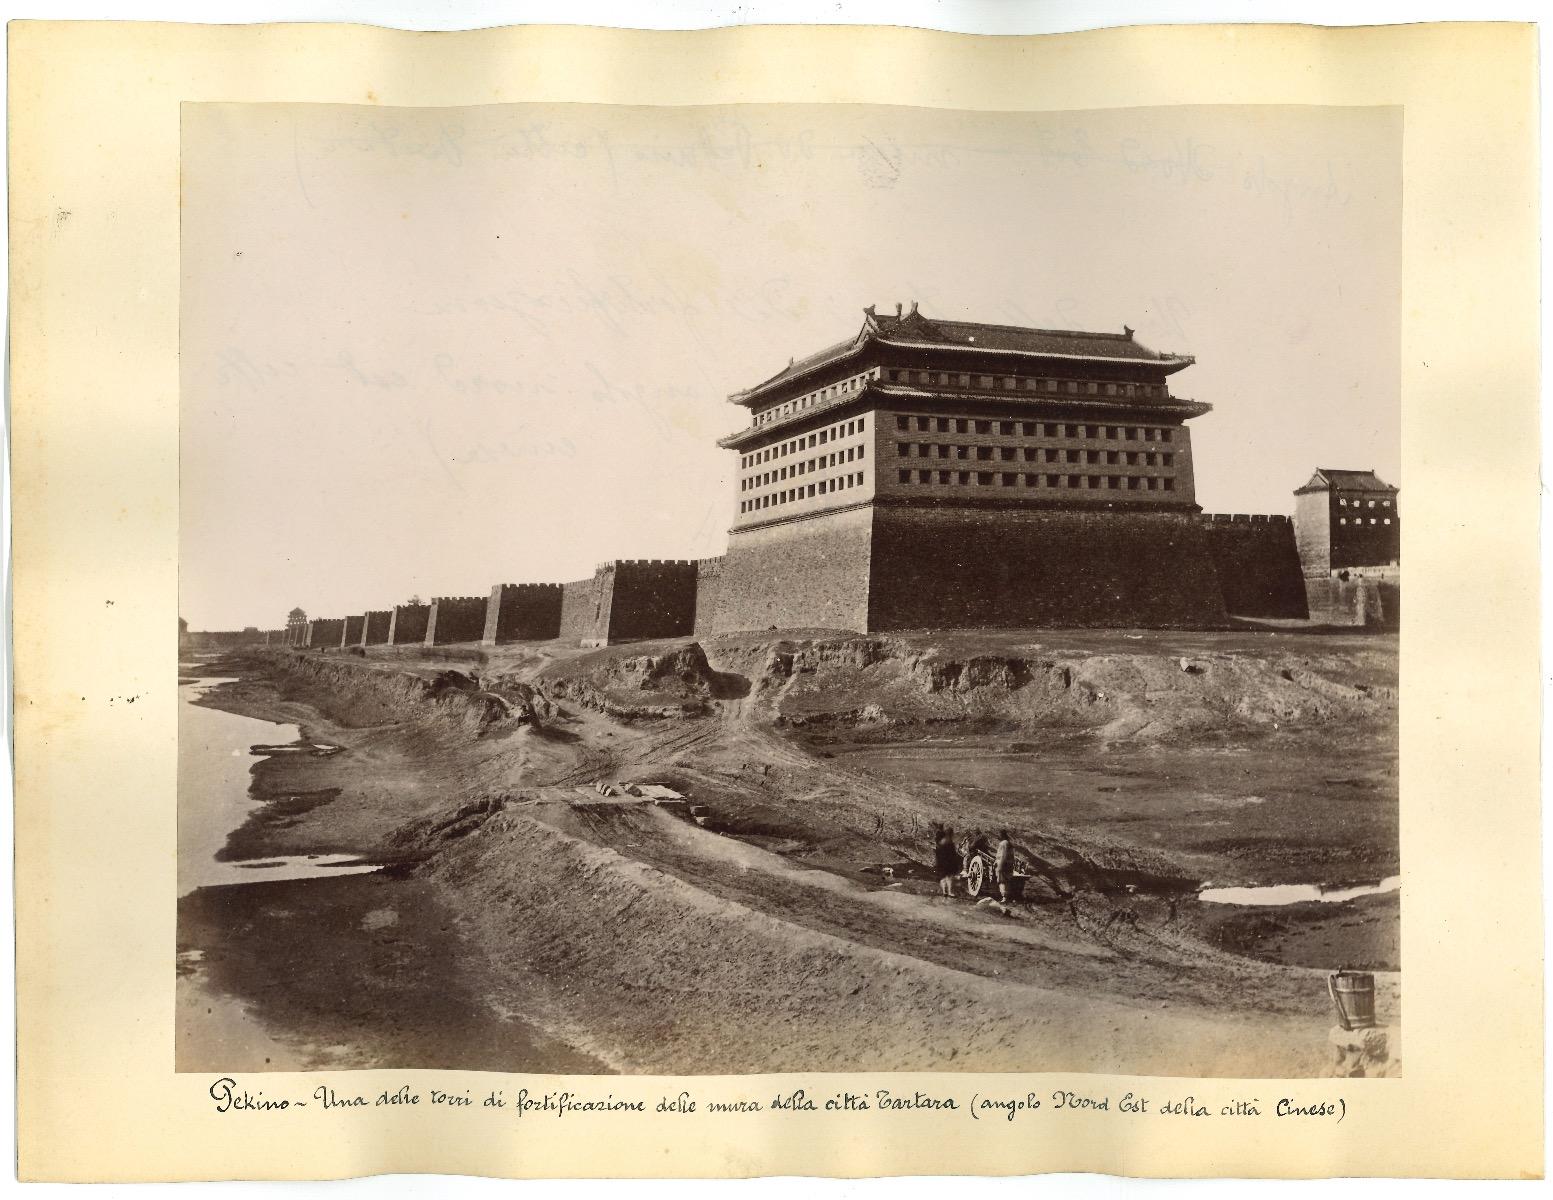 Walls and Fortification in Beijin - Original Albumen Print - 1880/90s - Photograph by Unknown